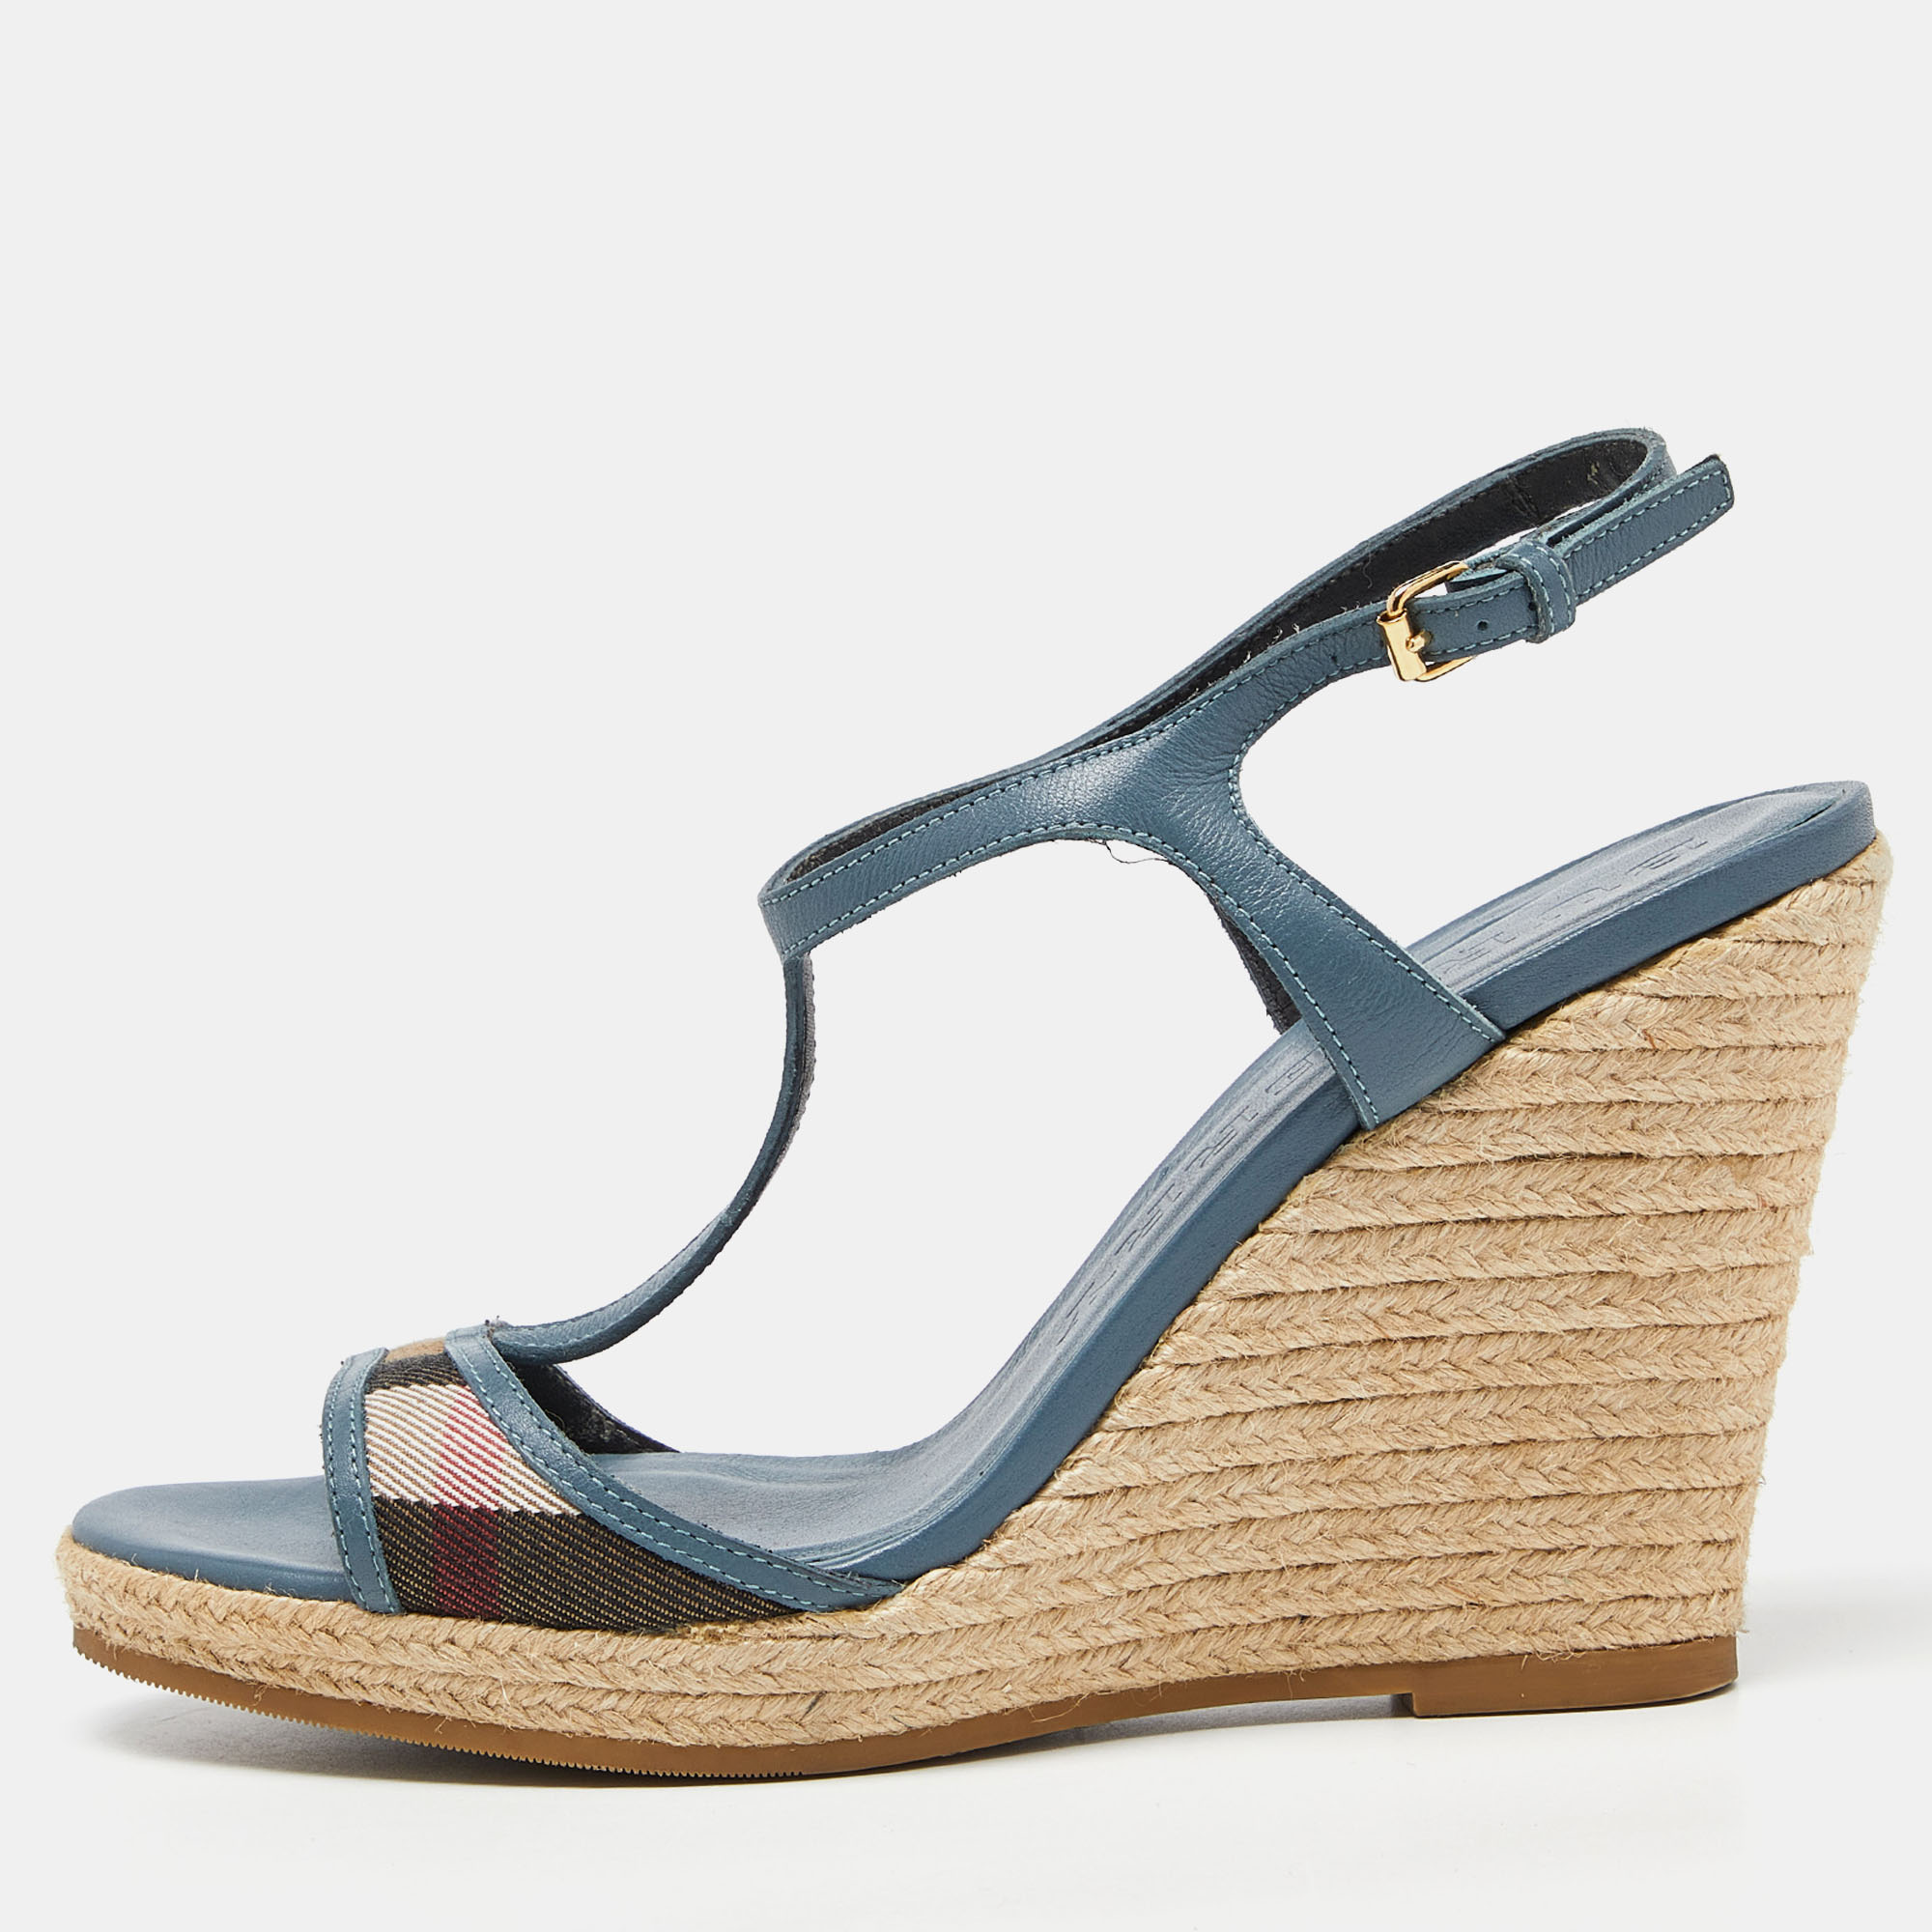 Burberry blue/brown leather and house check canvas espadrille wedge ankle strap sandals size 38